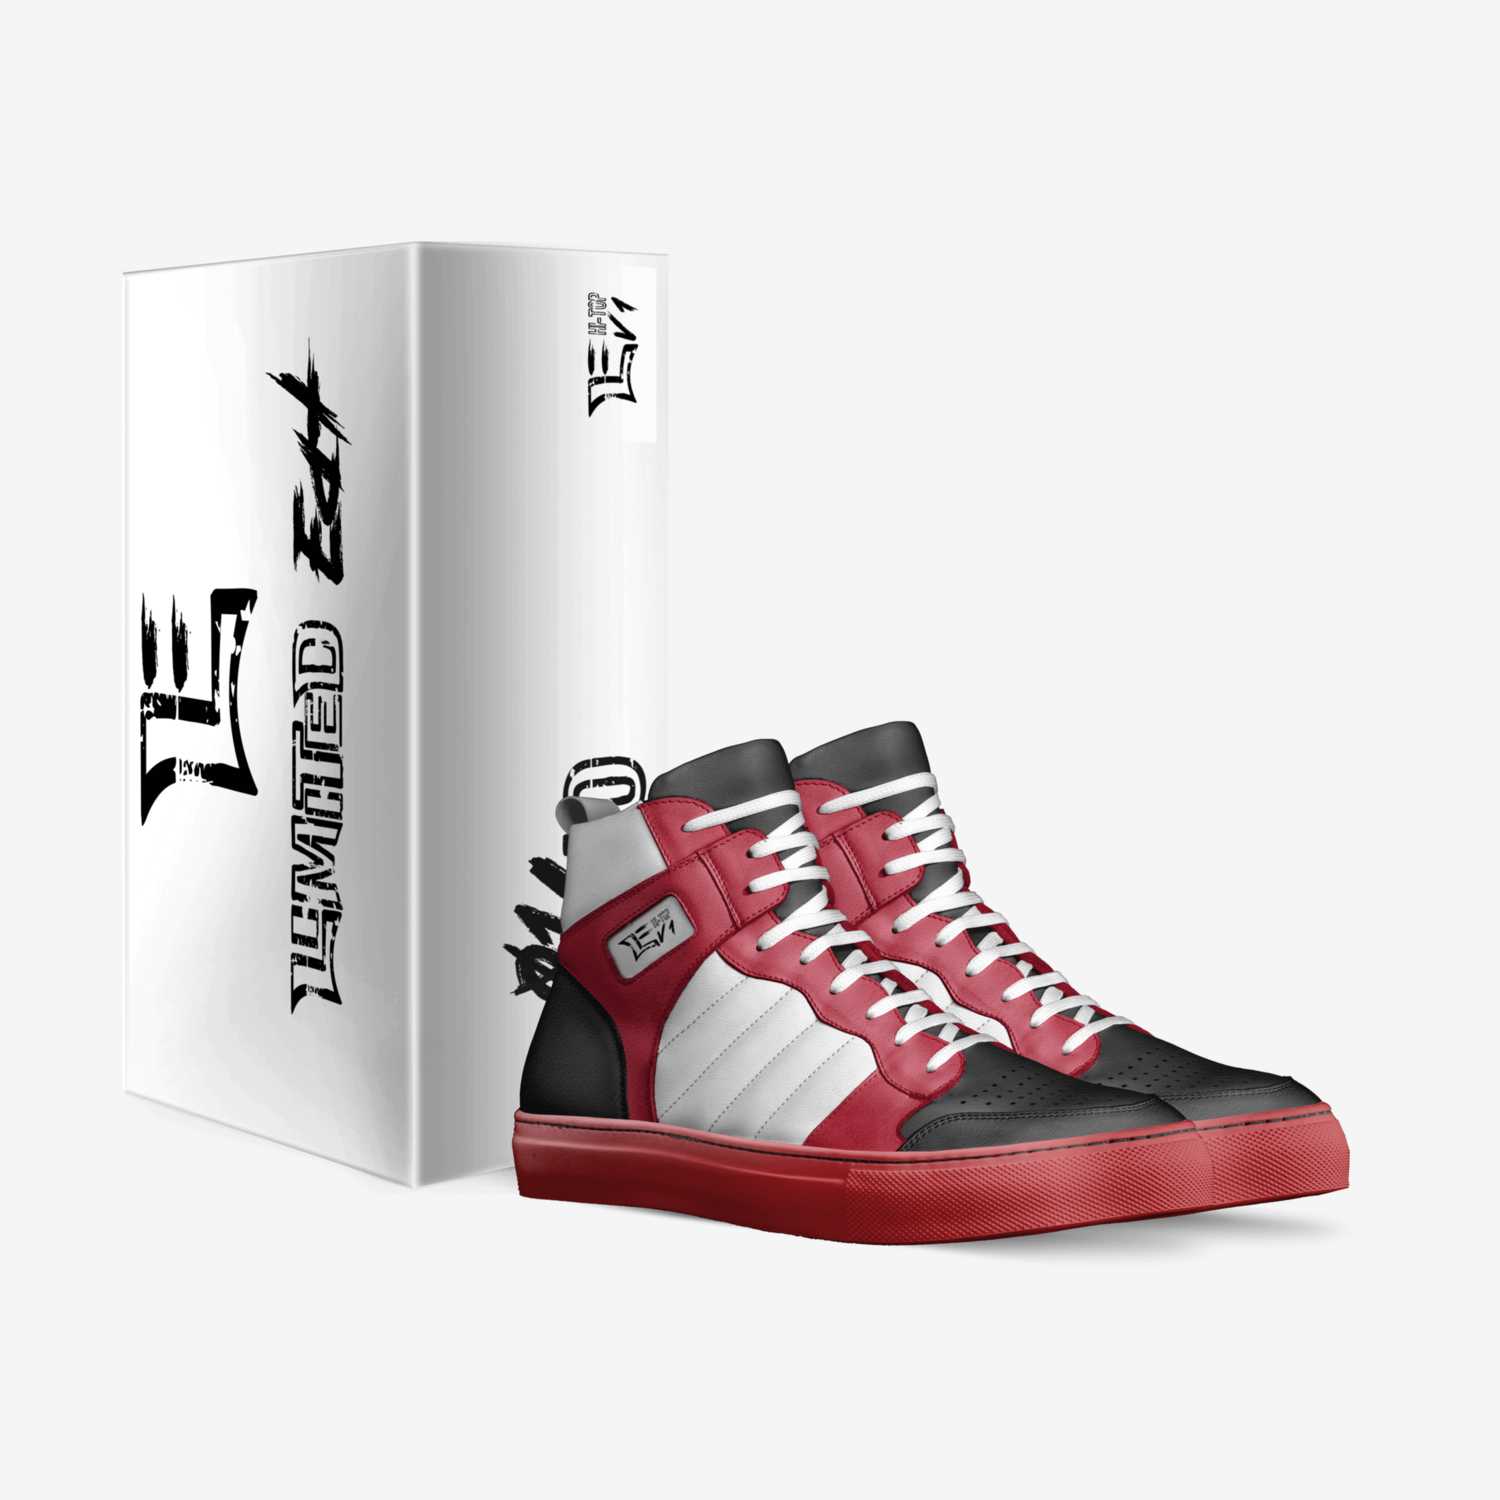 LE Hi-Top V.1 custom made in Italy shoes by Danial Lee | Box view